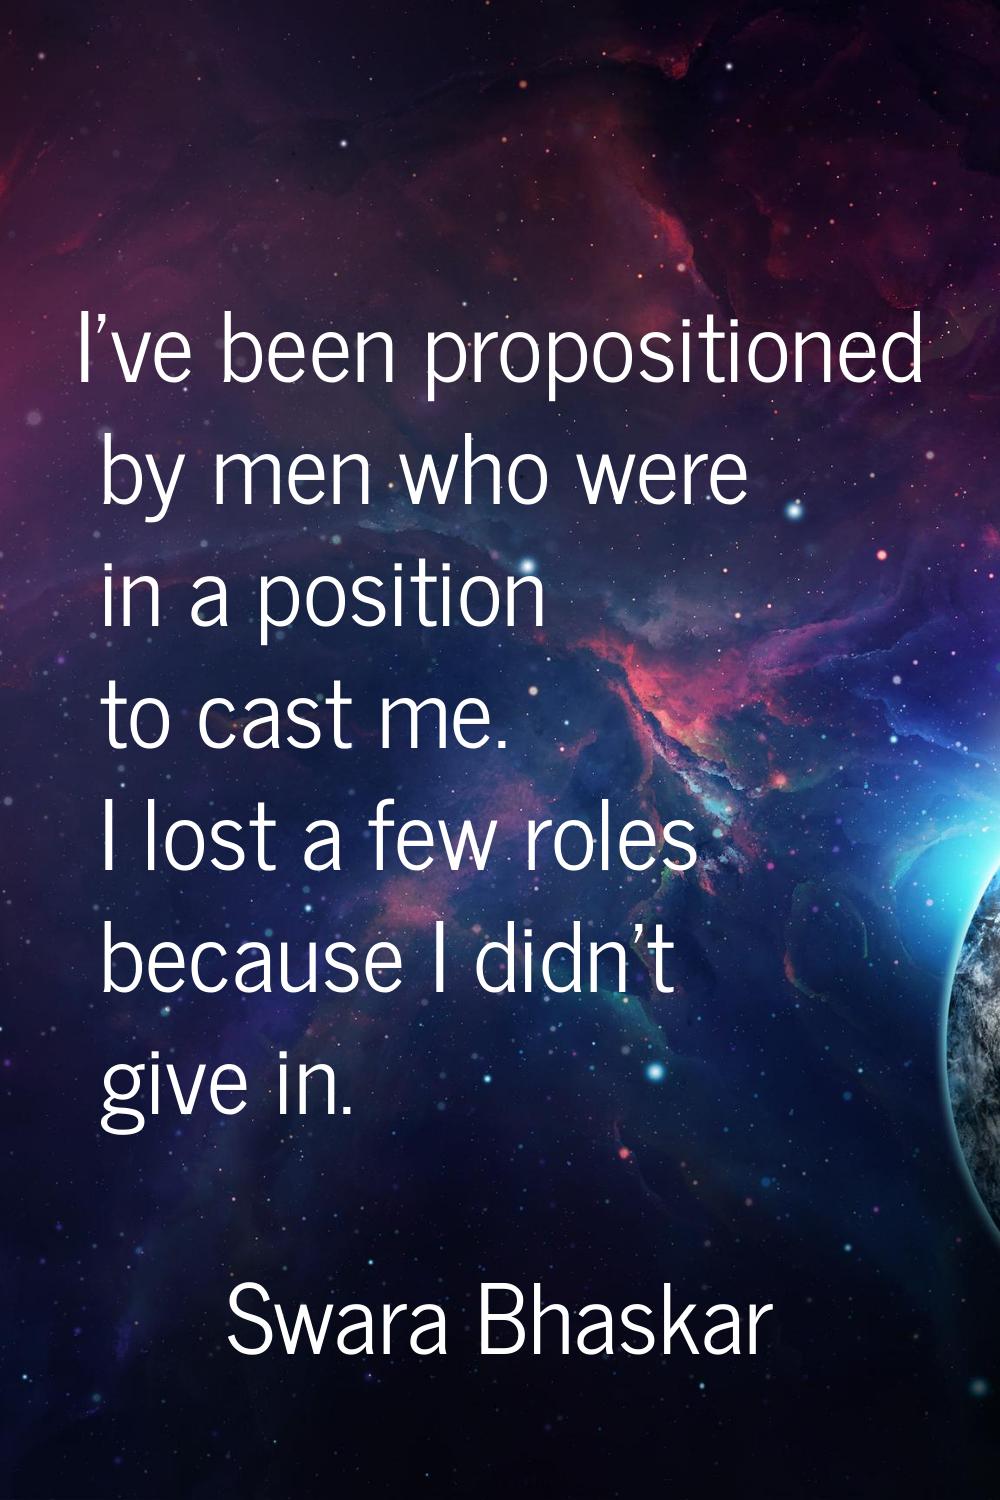 I've been propositioned by men who were in a position to cast me. I lost a few roles because I didn